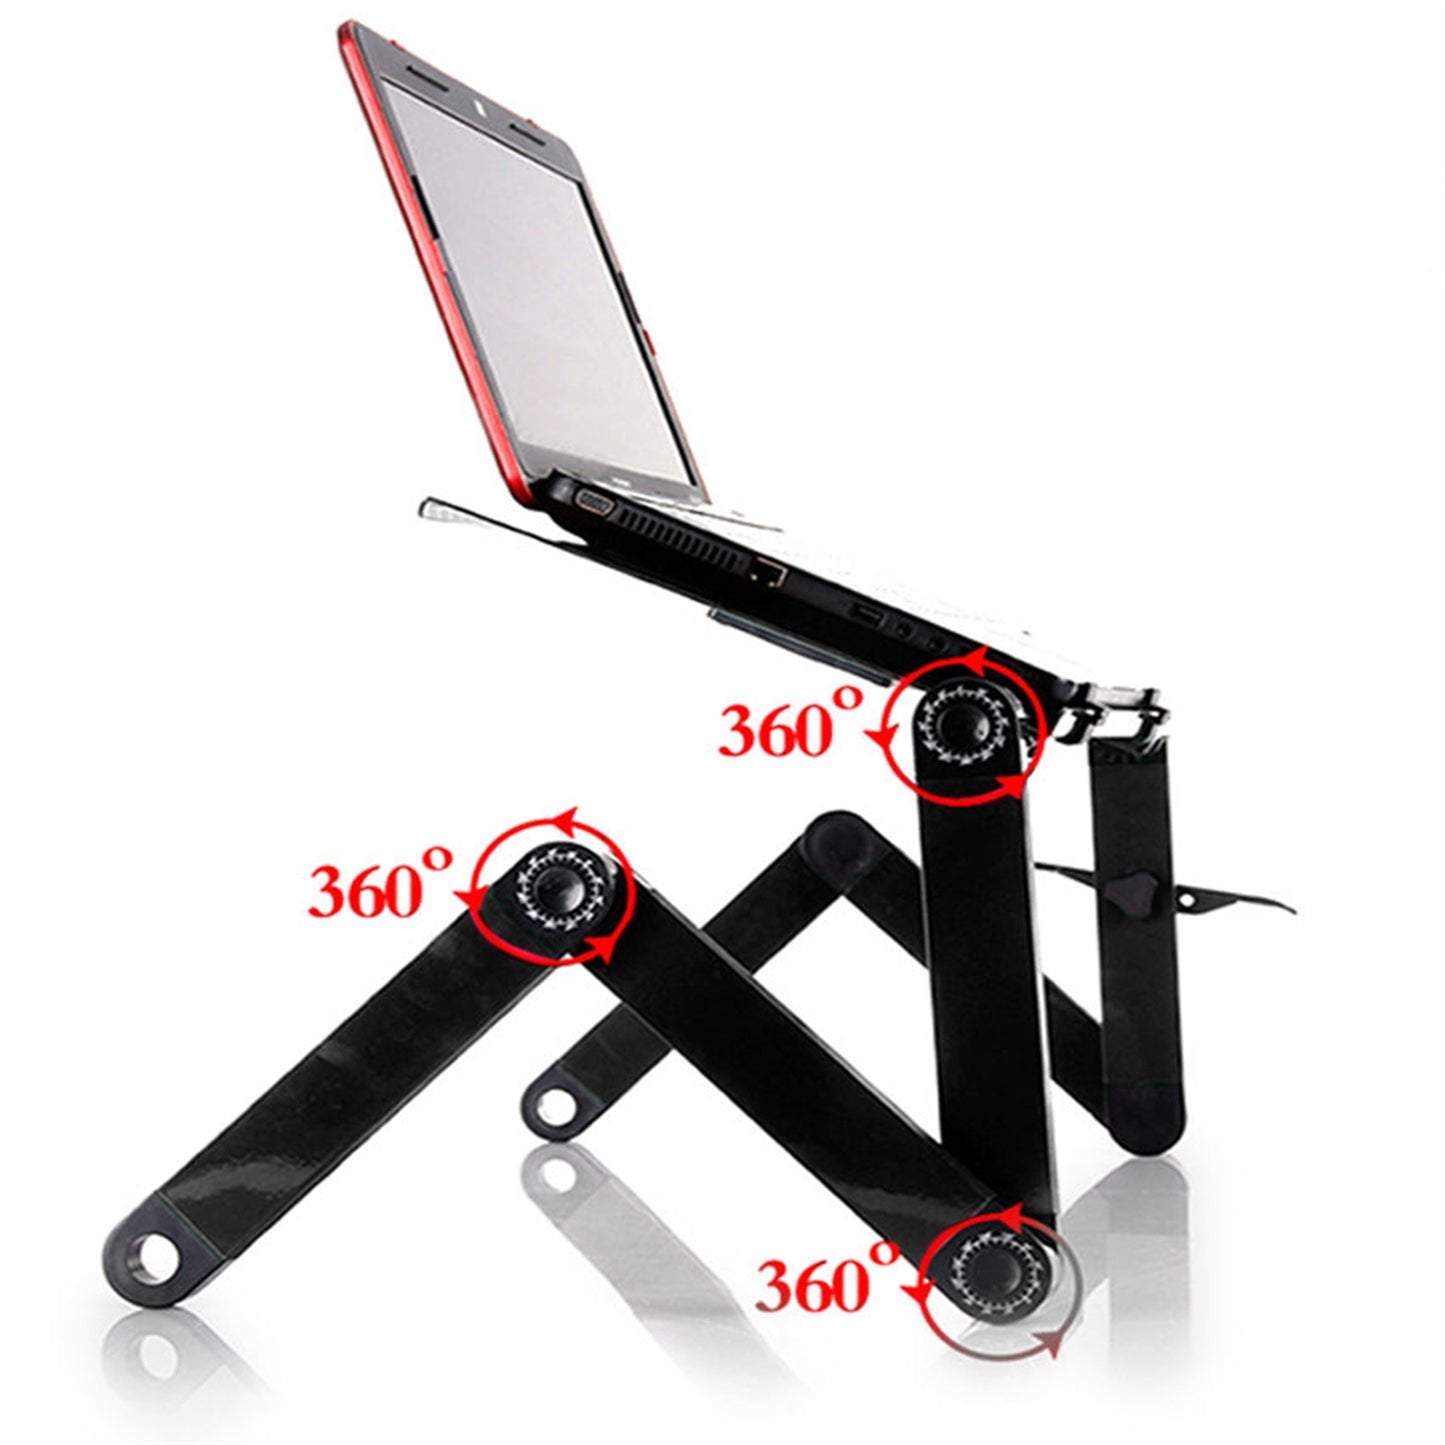 Portable Adjustable Laptop Stand